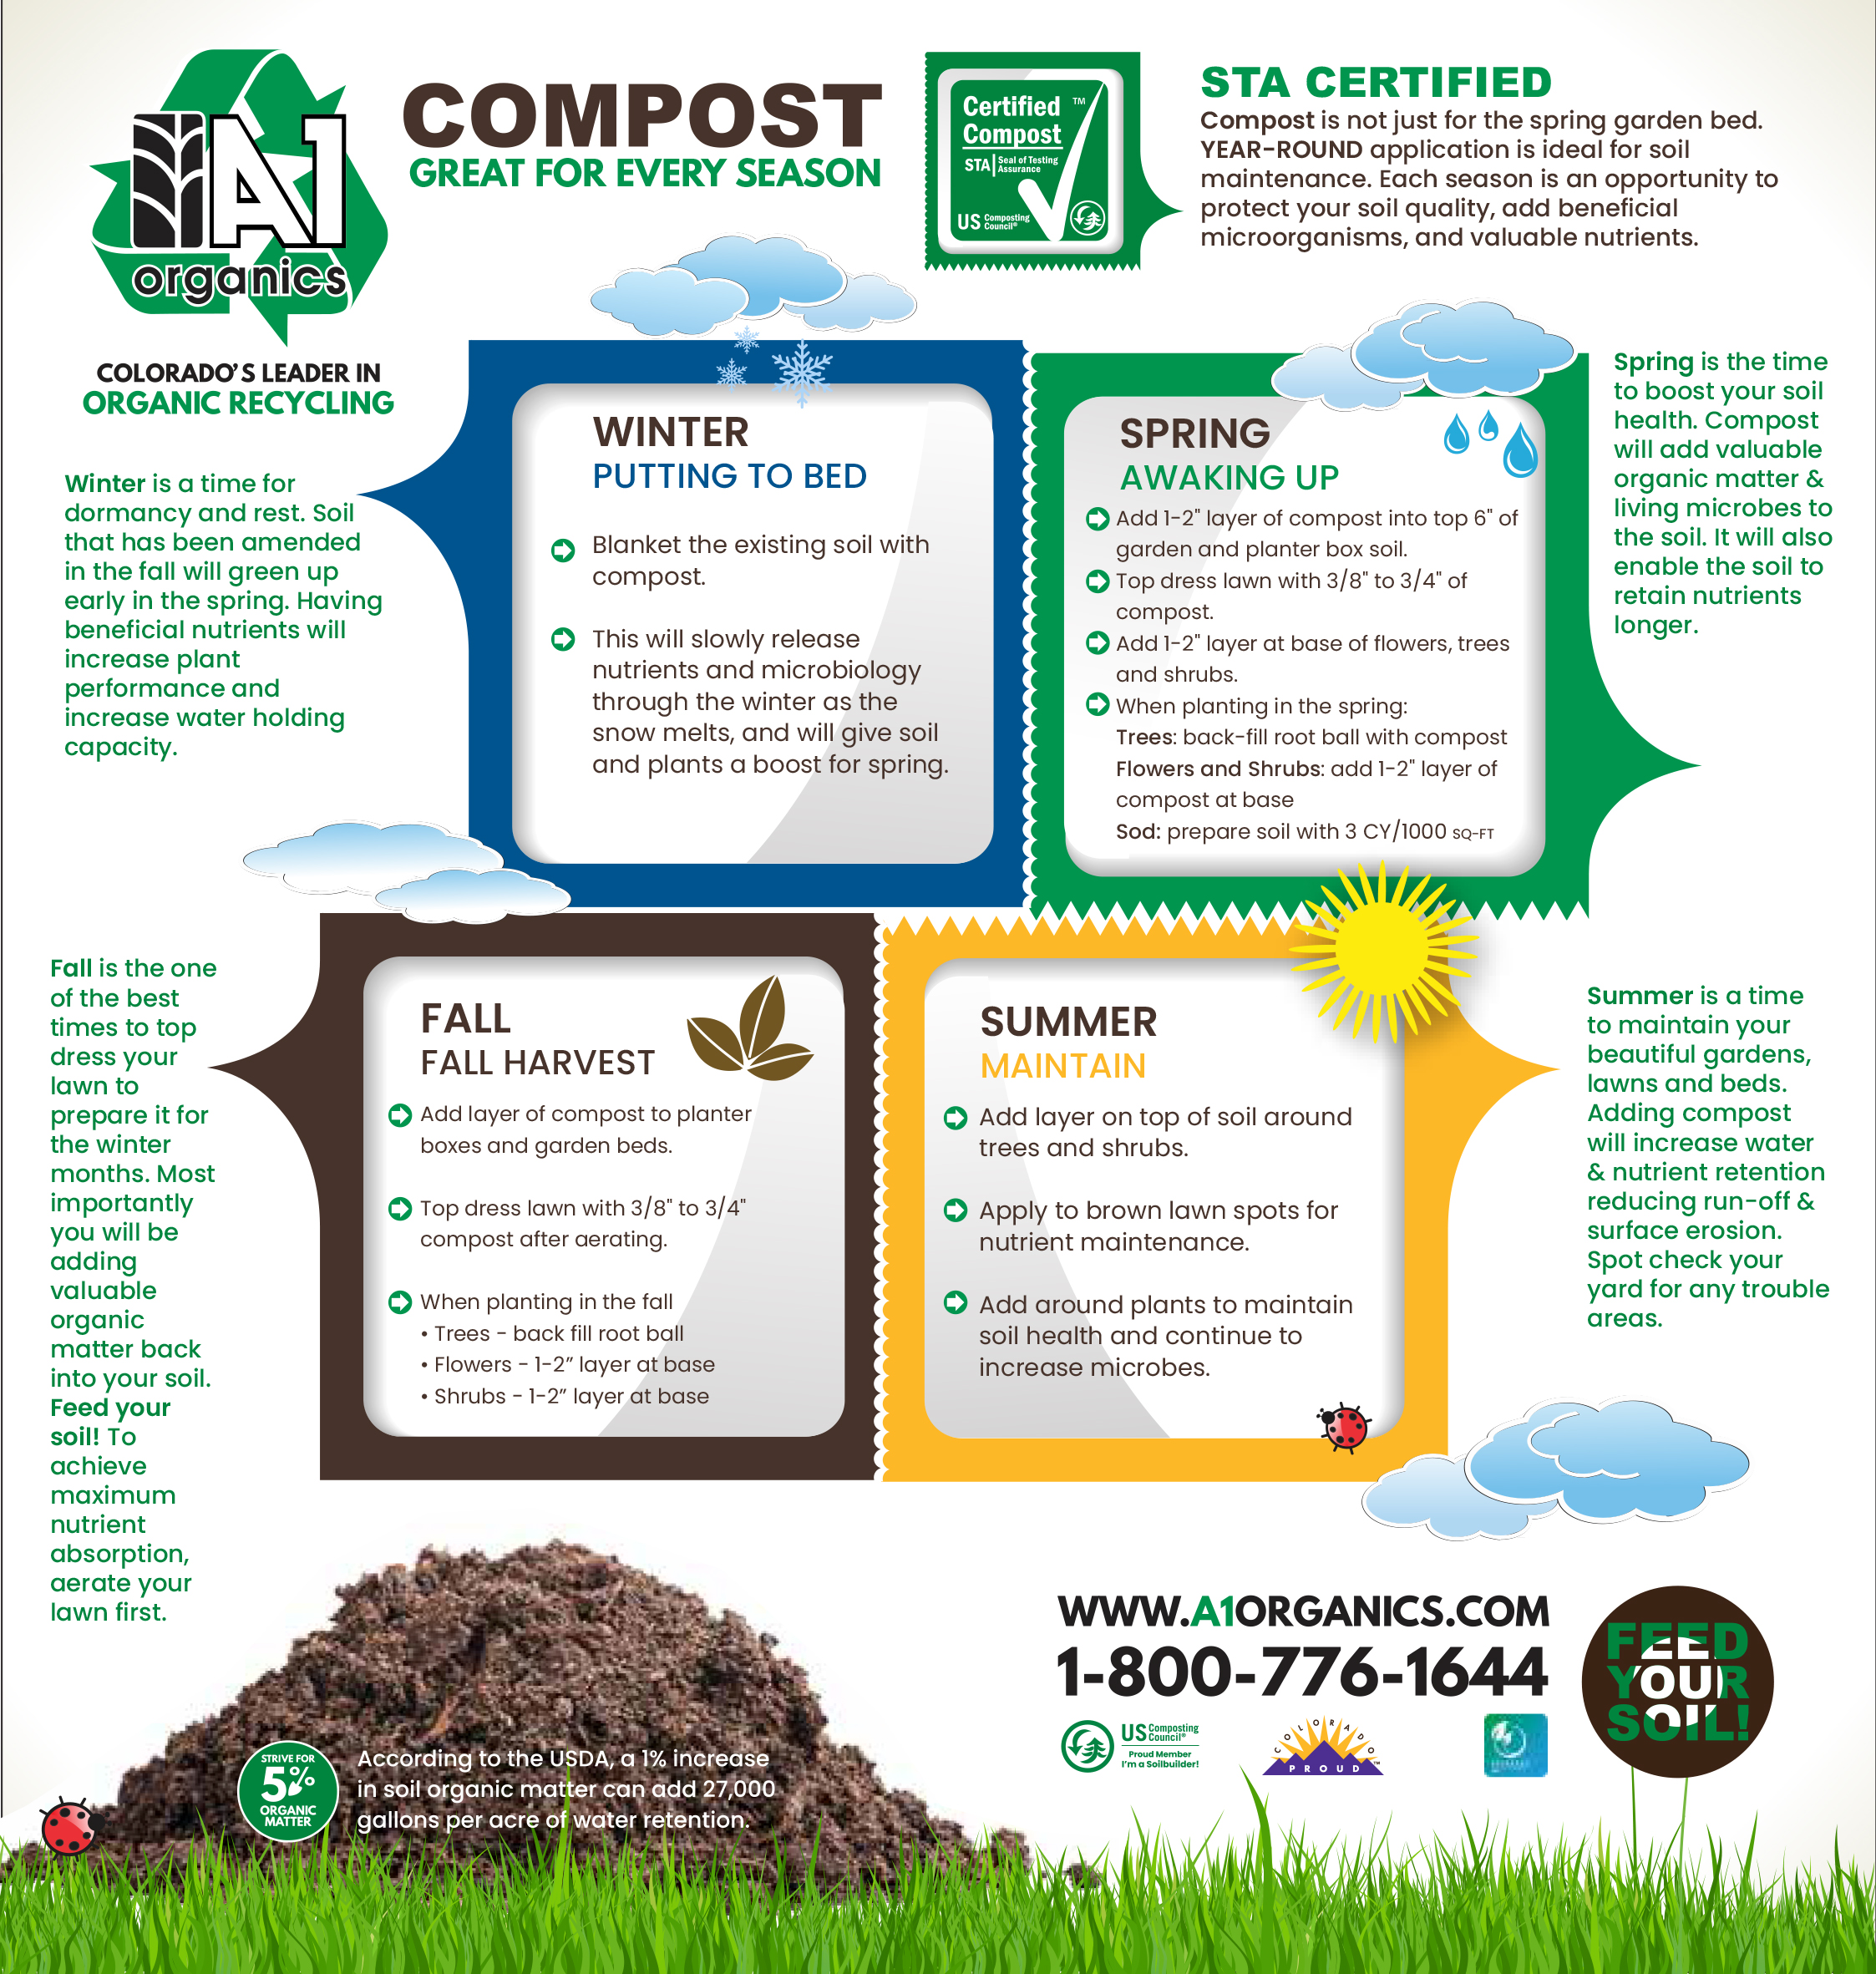 A1OG_annual_compost_applications_final_9.19